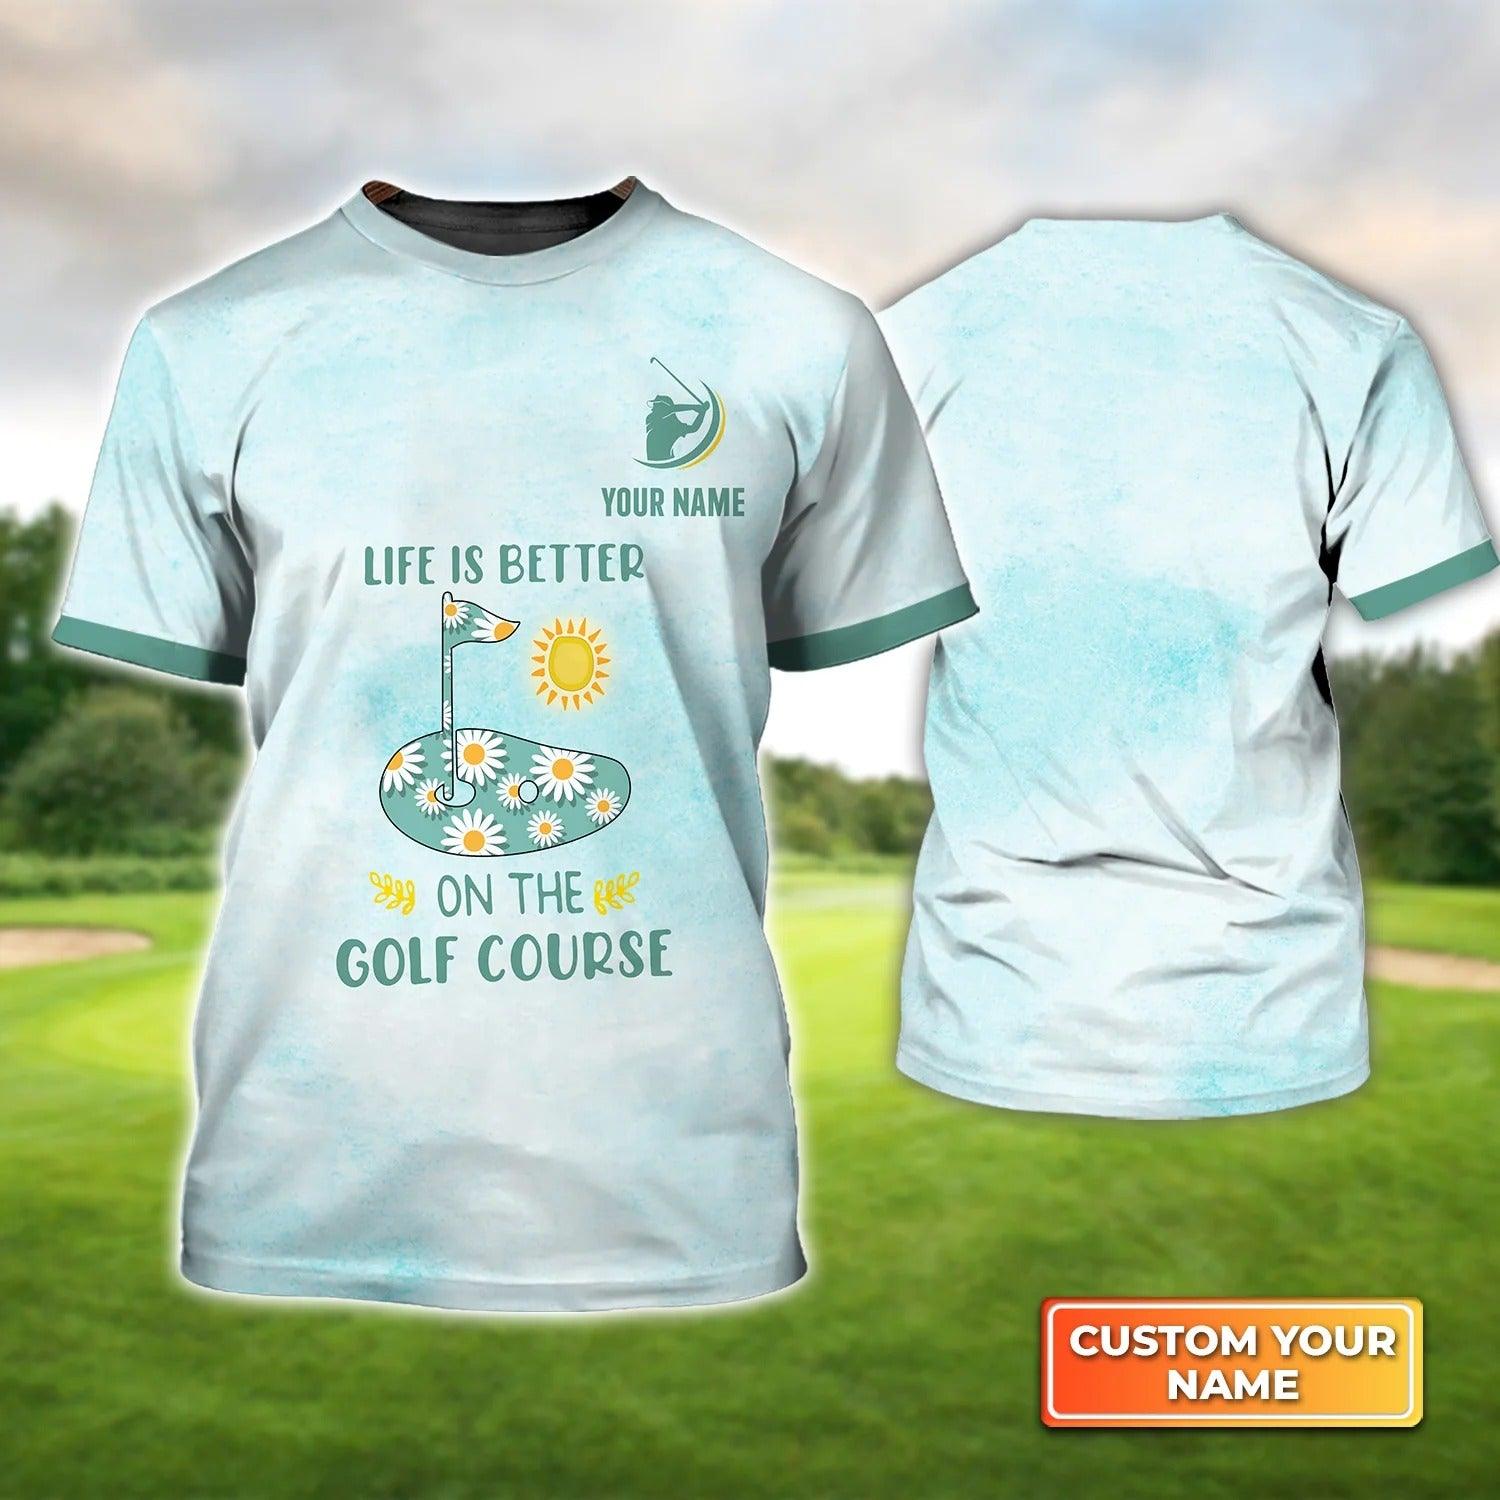 Customized Golf T Shirt, Personalized Name Life Is Better On The Golf Daisy Flower T Shirt For Golf Lovers - Perfect Gift For Golfer, Friend, Family - Amzanimalsgift